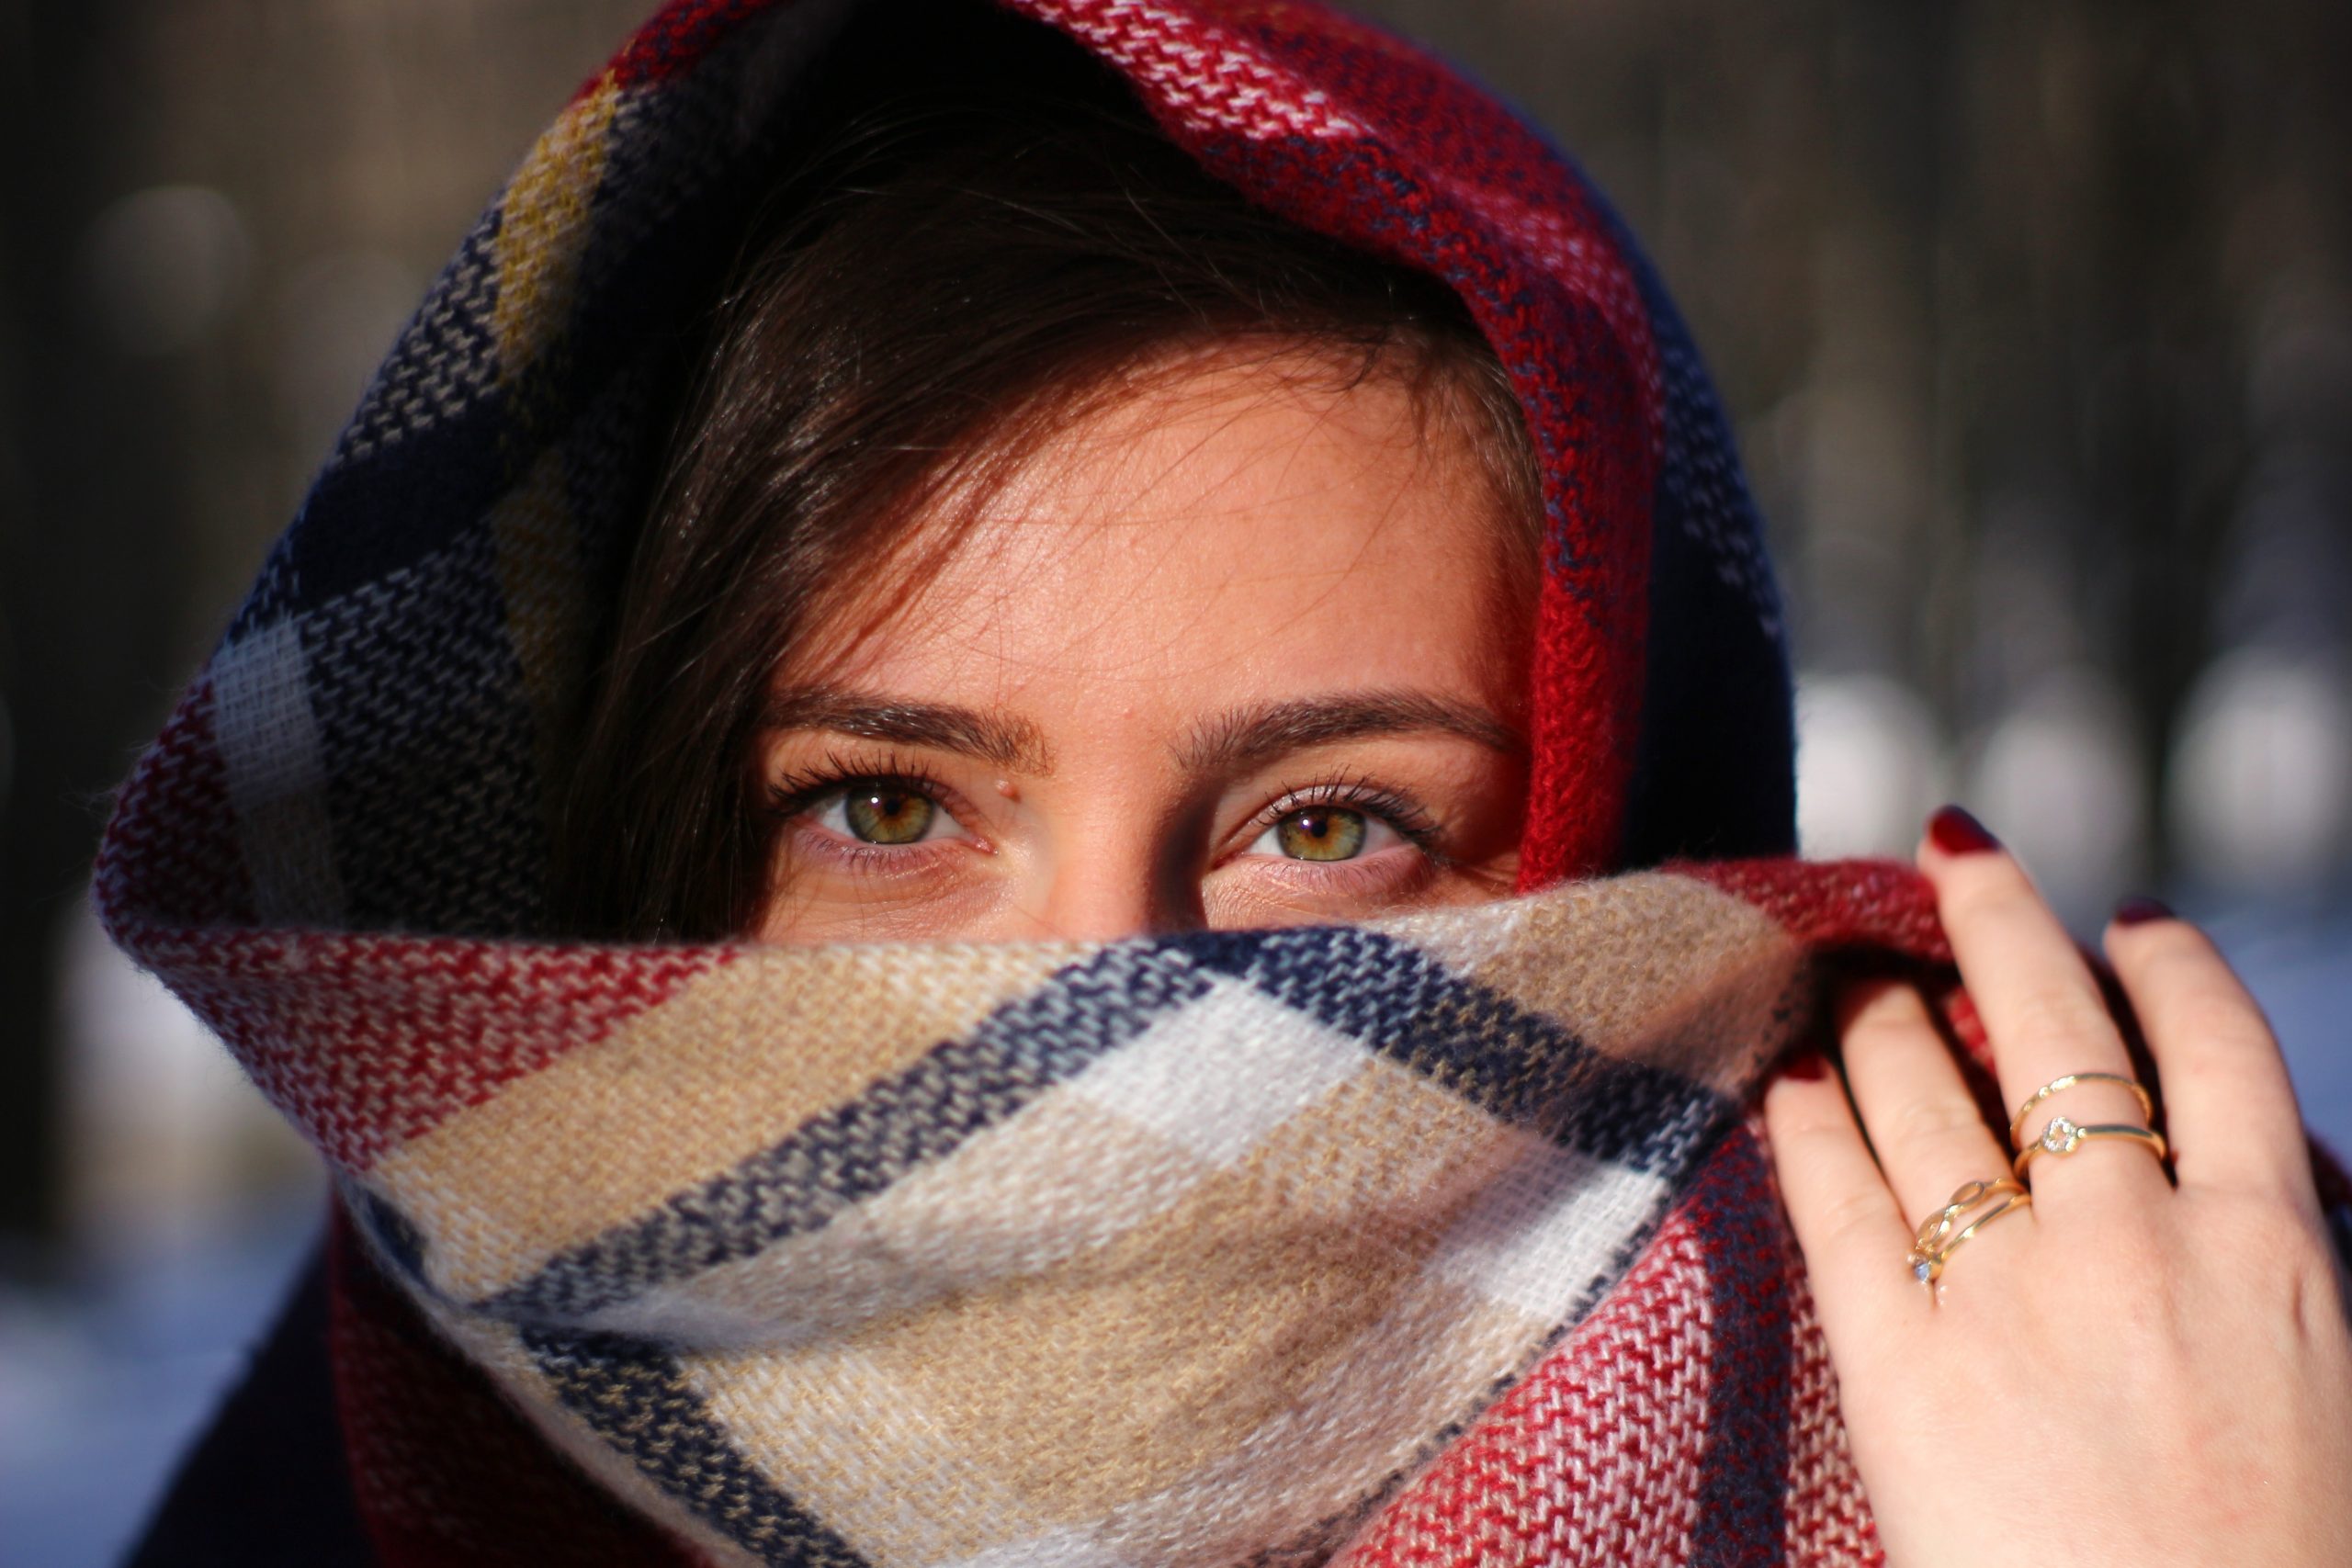 woman-covering-her-face-with-scarf-4376410